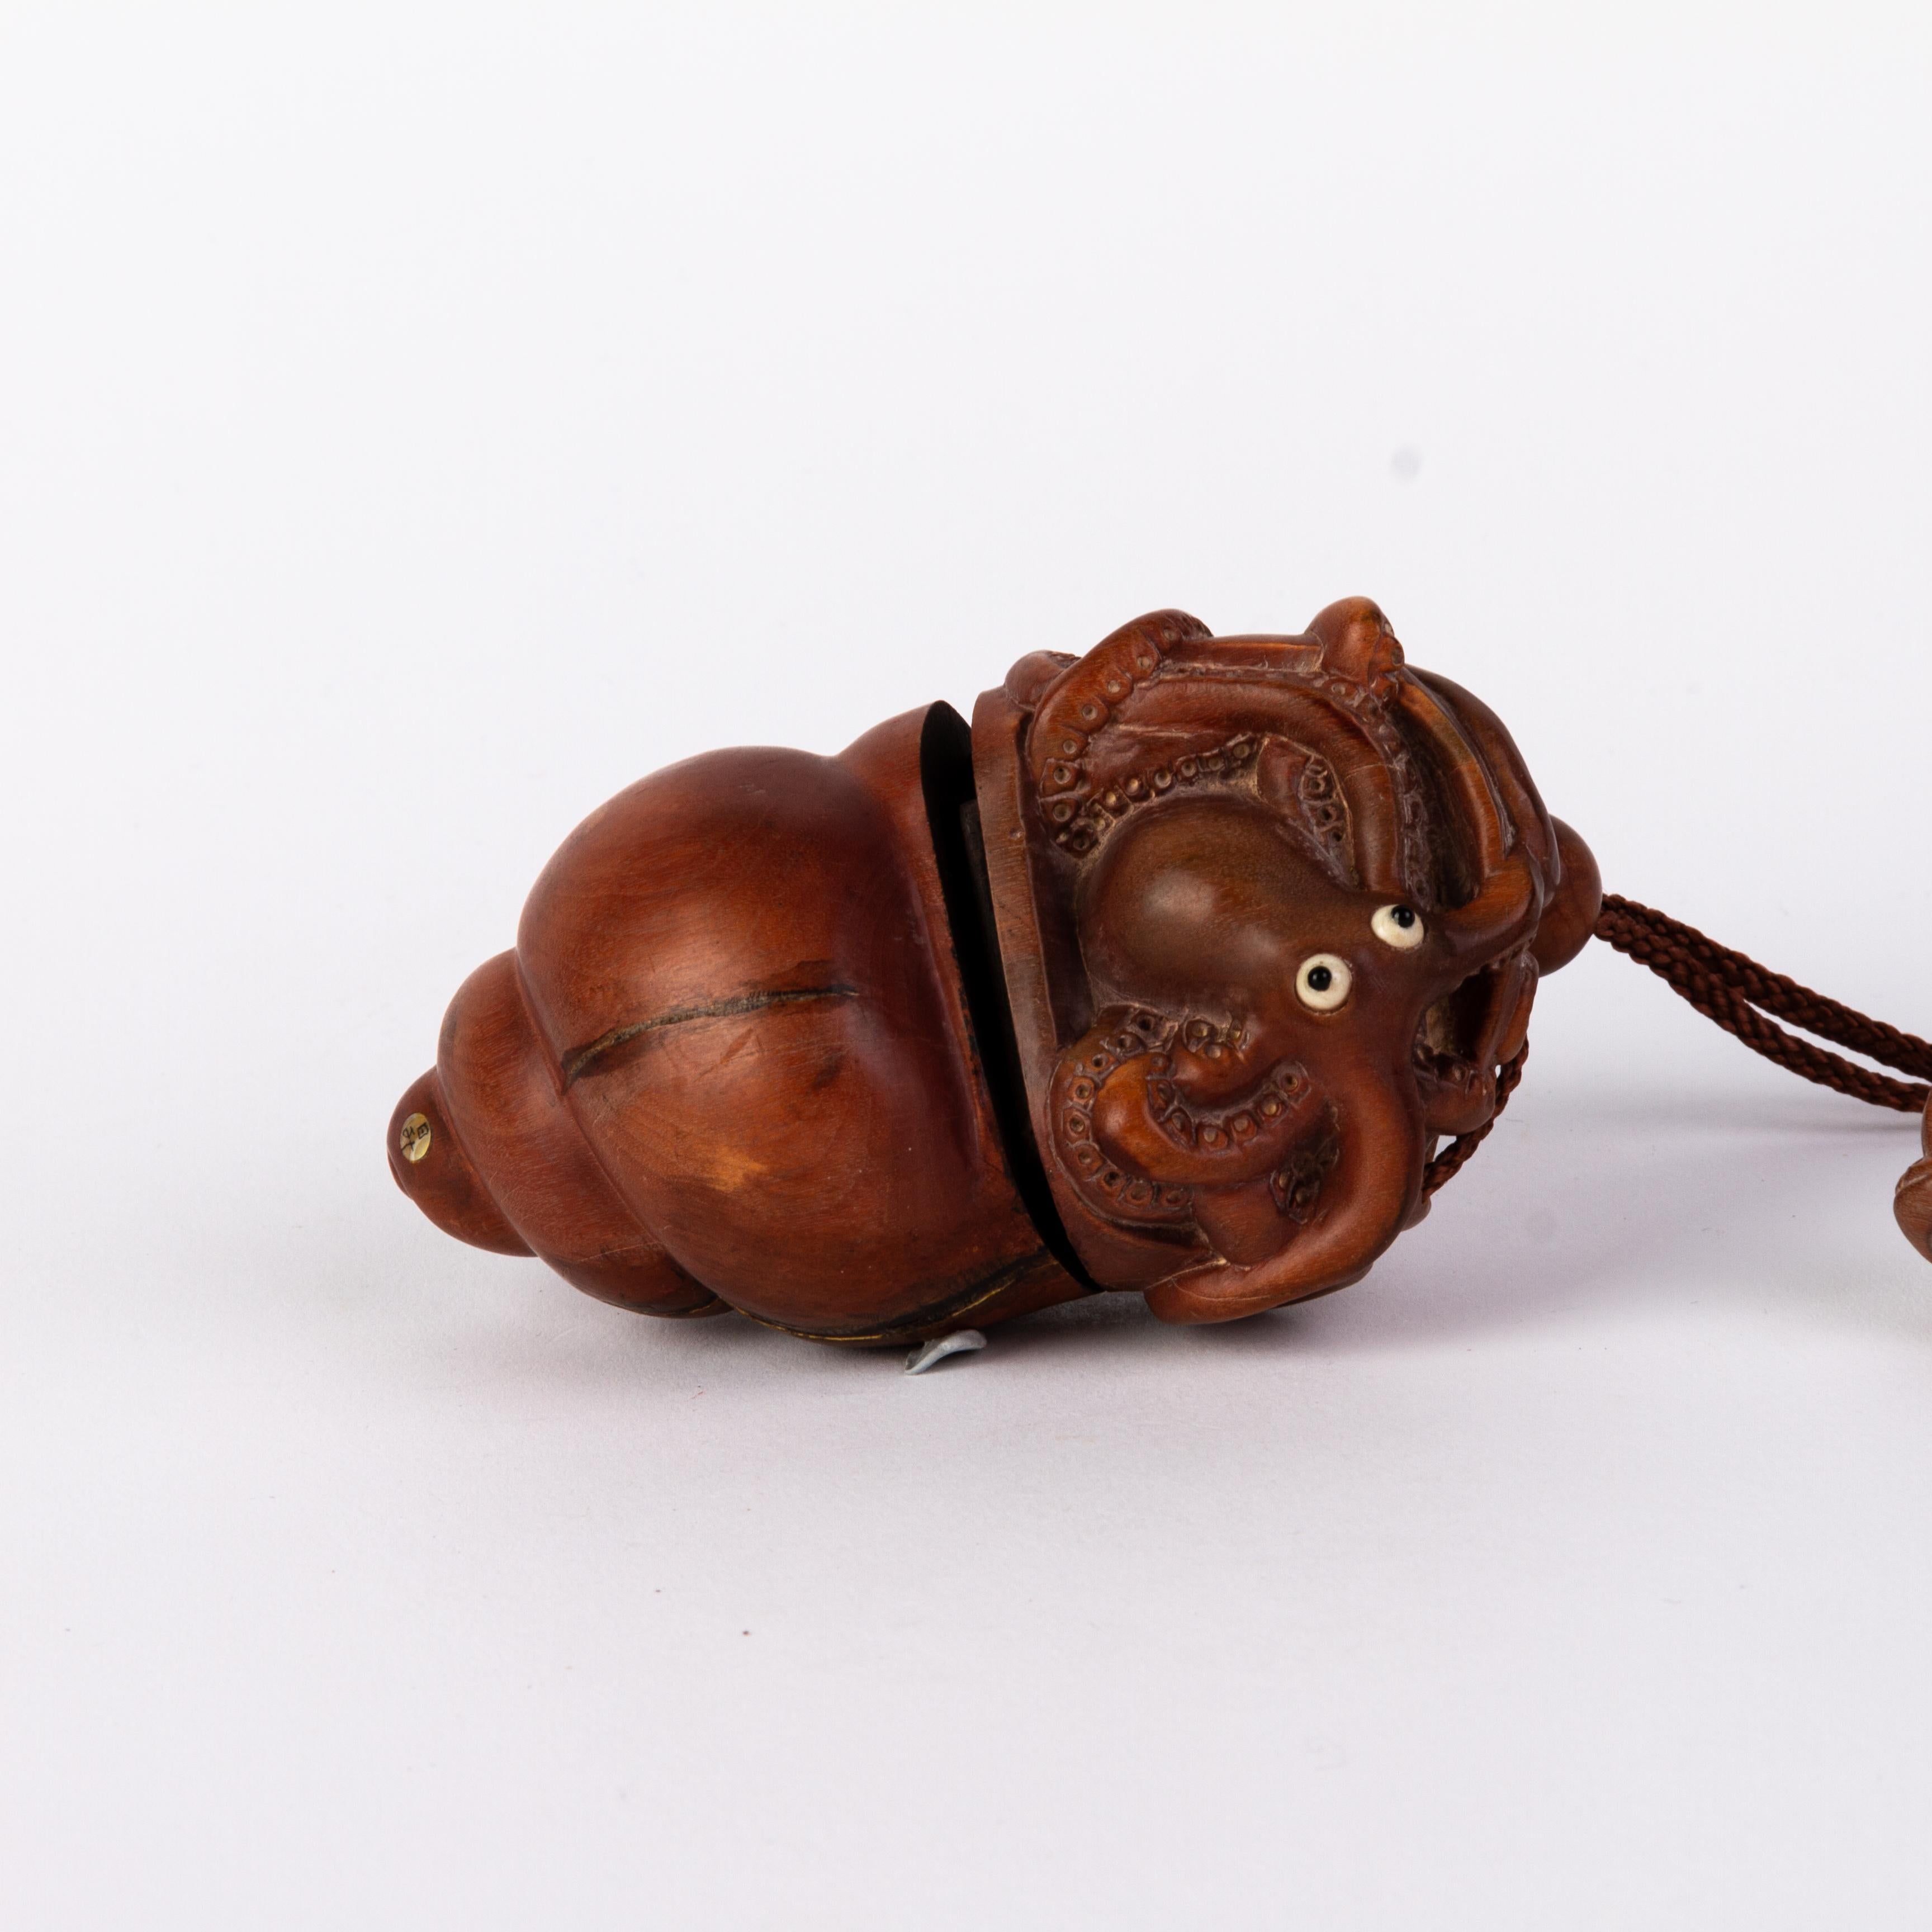 Signed Japanese Carved Wood Octopus Inro Ojime Netsuke For Sale 3